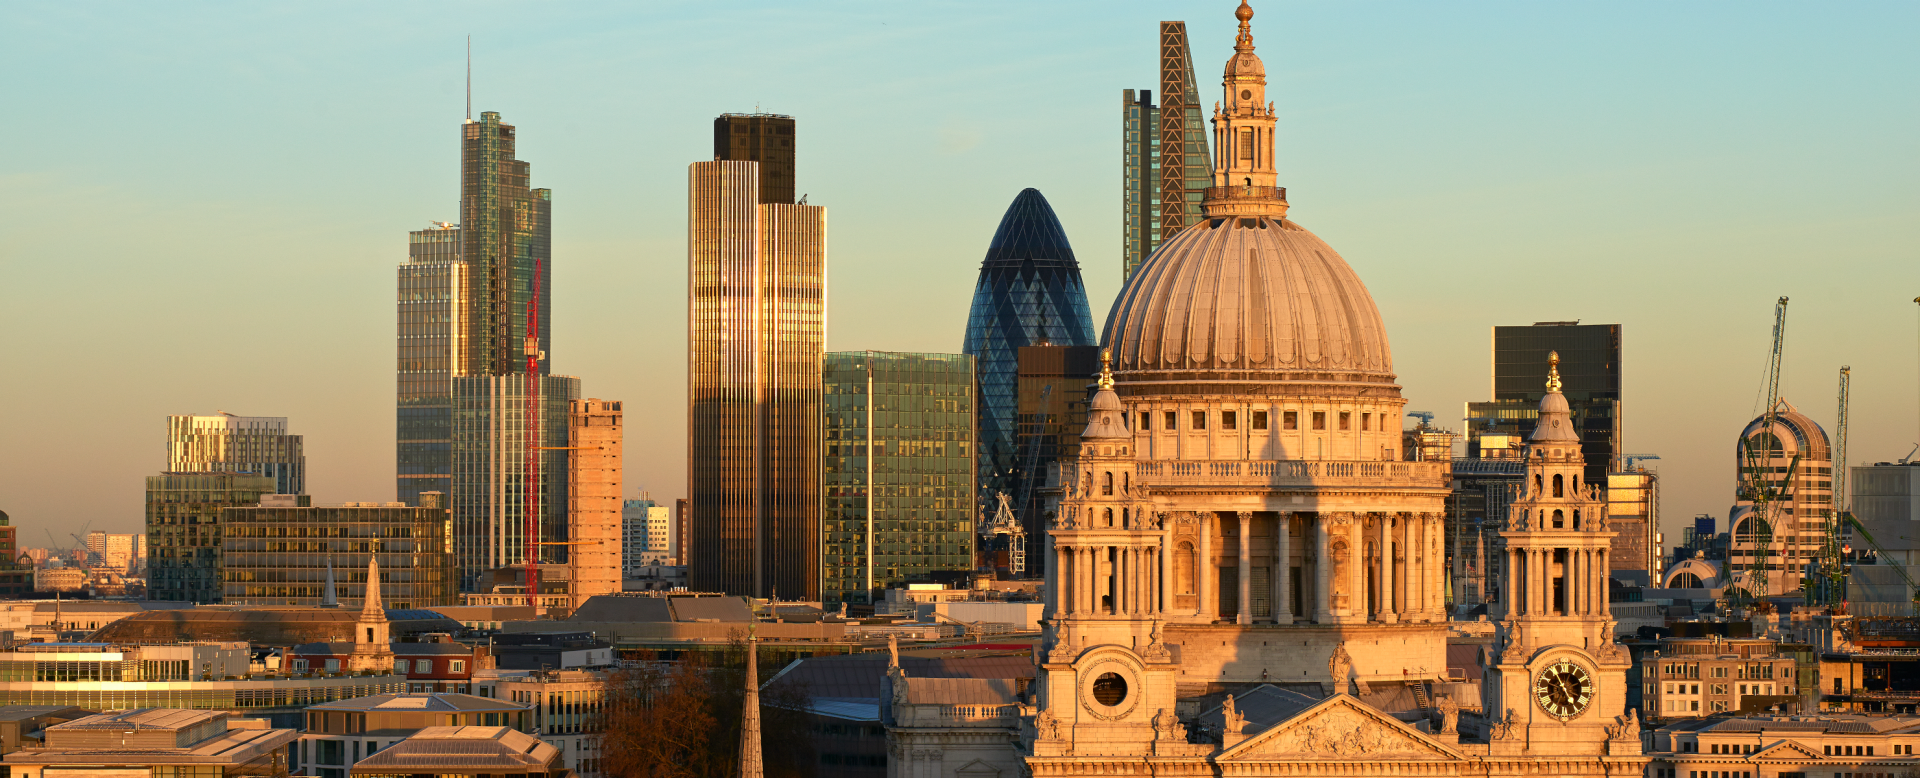 A view on the skyline of the banking district of London, where DZ BANK London is located